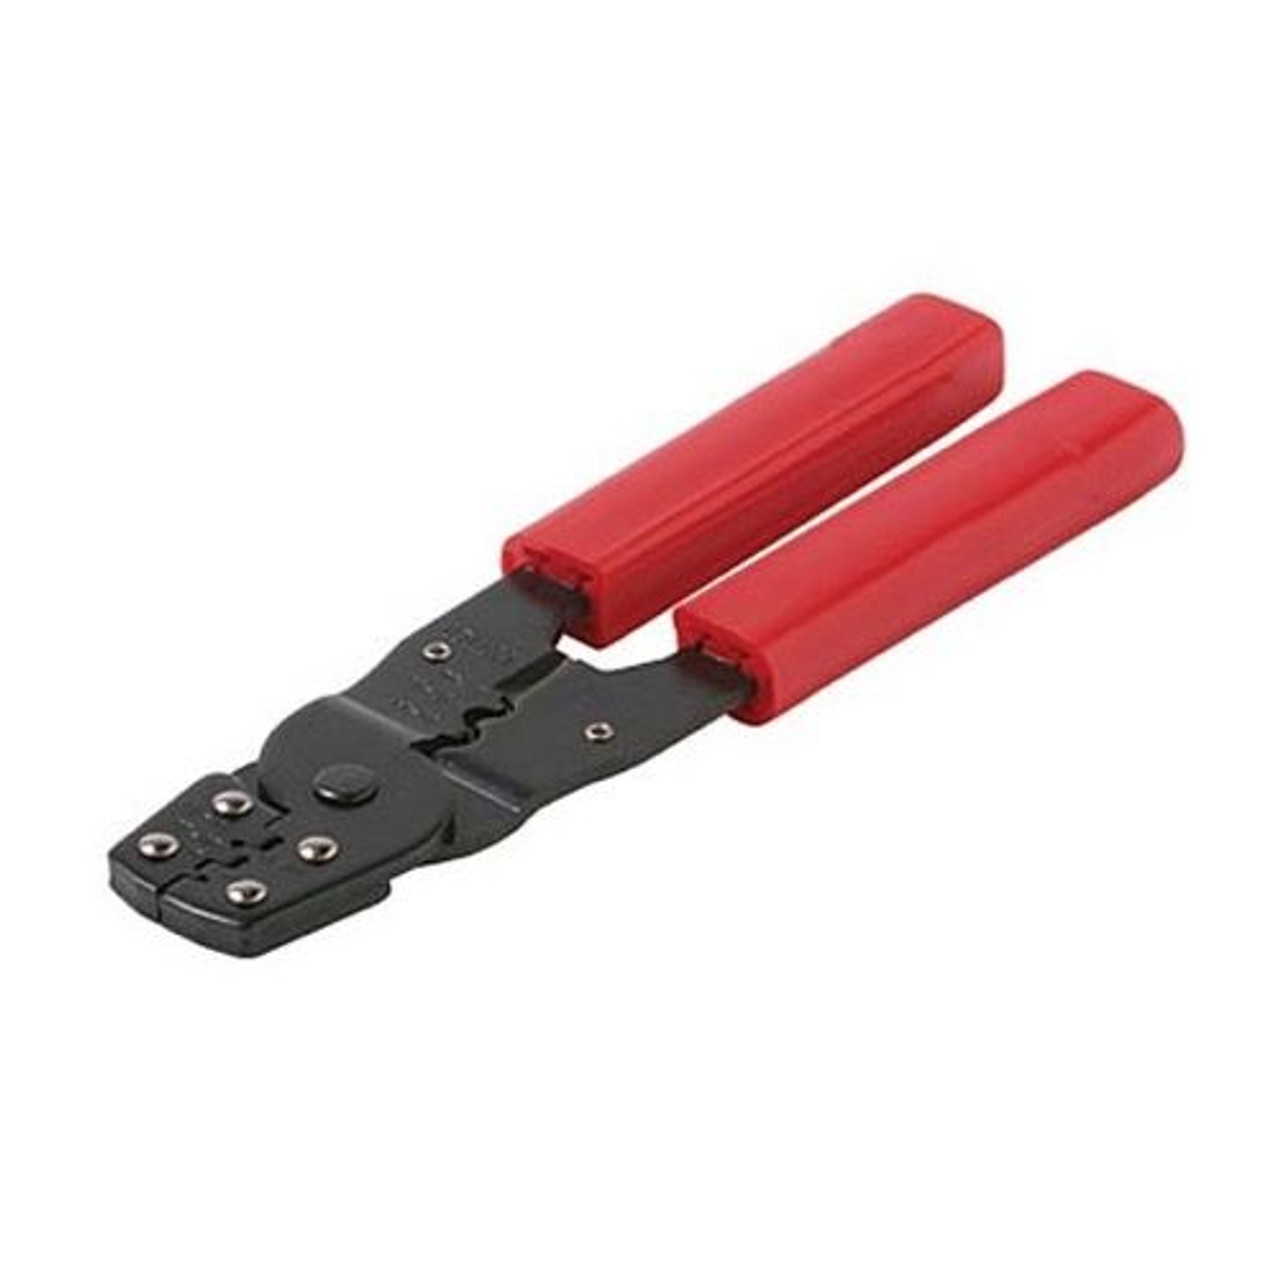 Eagle D-Sub Pin Install Crimping Tool AWG 22-28 Installation Pro Grade with Cushioned Grip and Hardened Steel Design Crimper